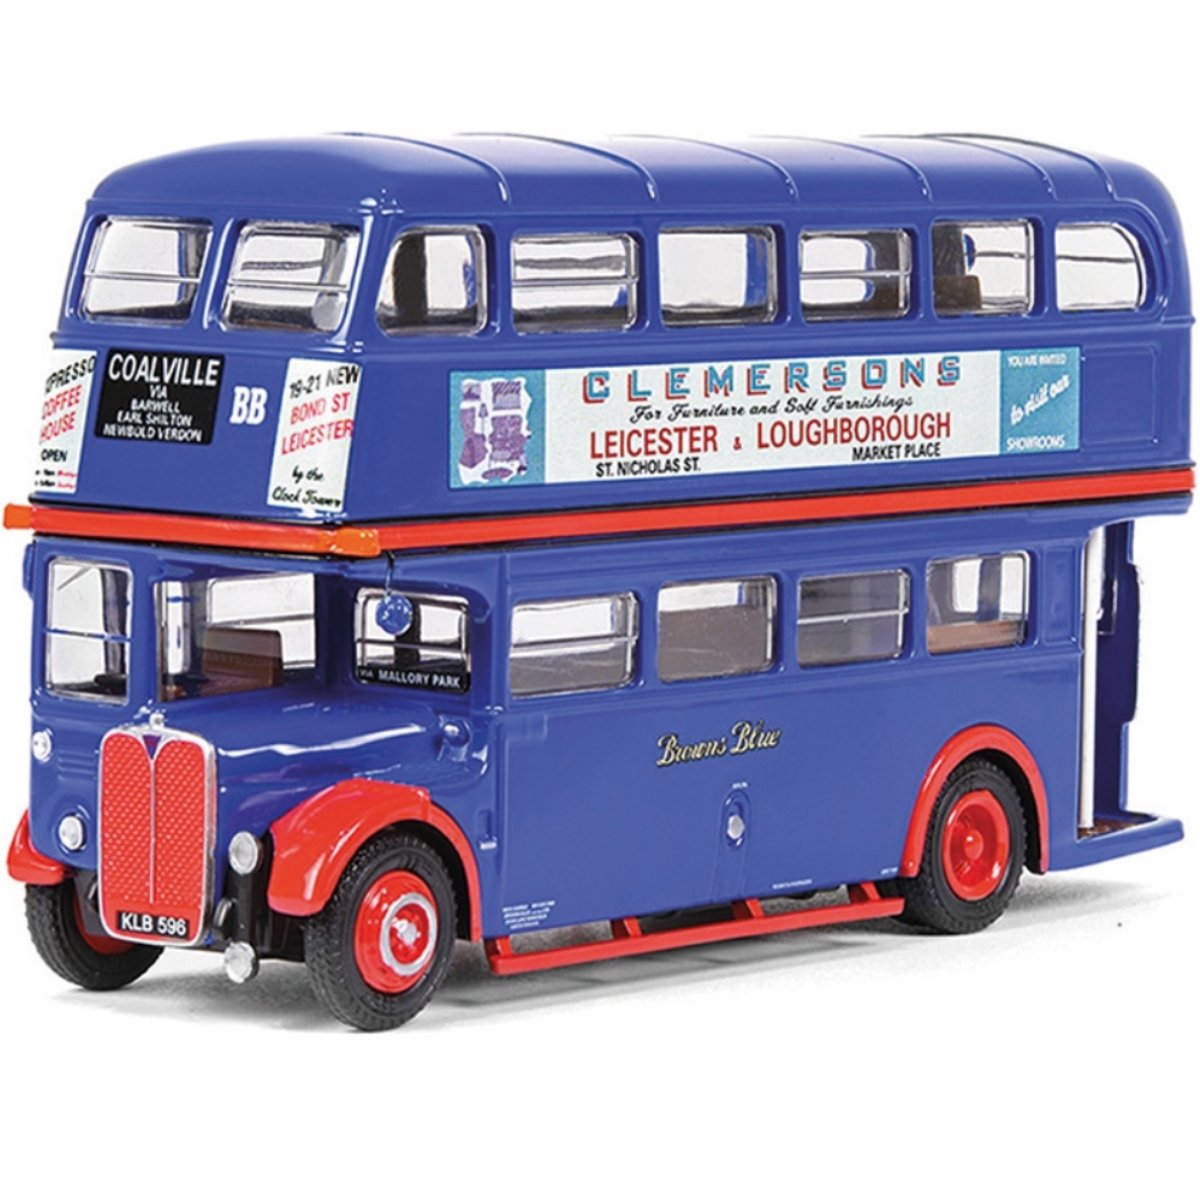 1:76 Scale Model Bus - Exclusive First Editions AEC RT Bus Browns Blue